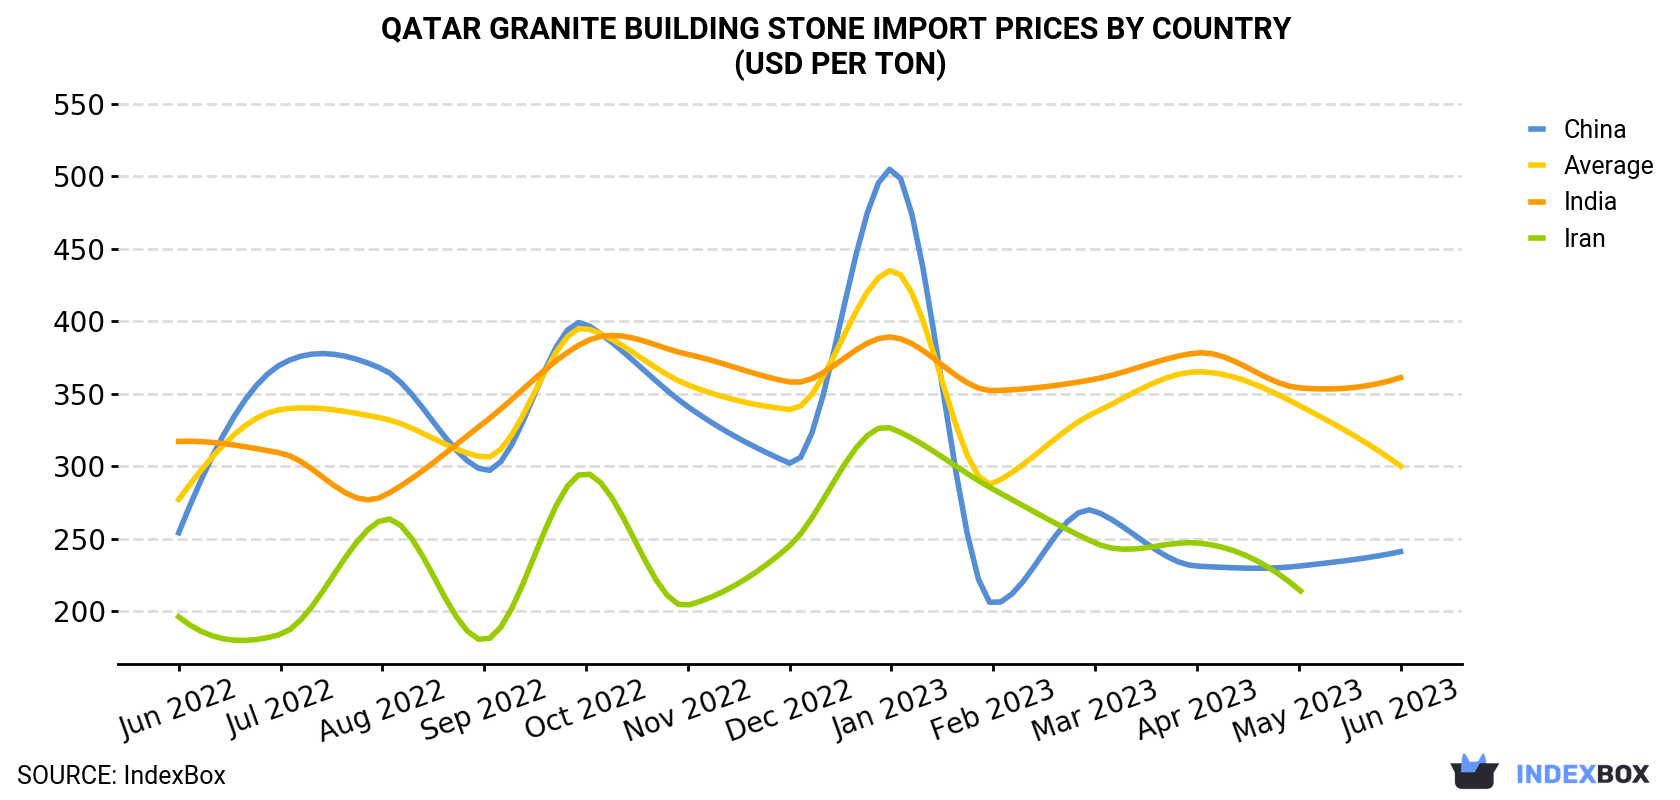 Qatar Granite Building Stone Import Prices By Country (USD Per Ton)